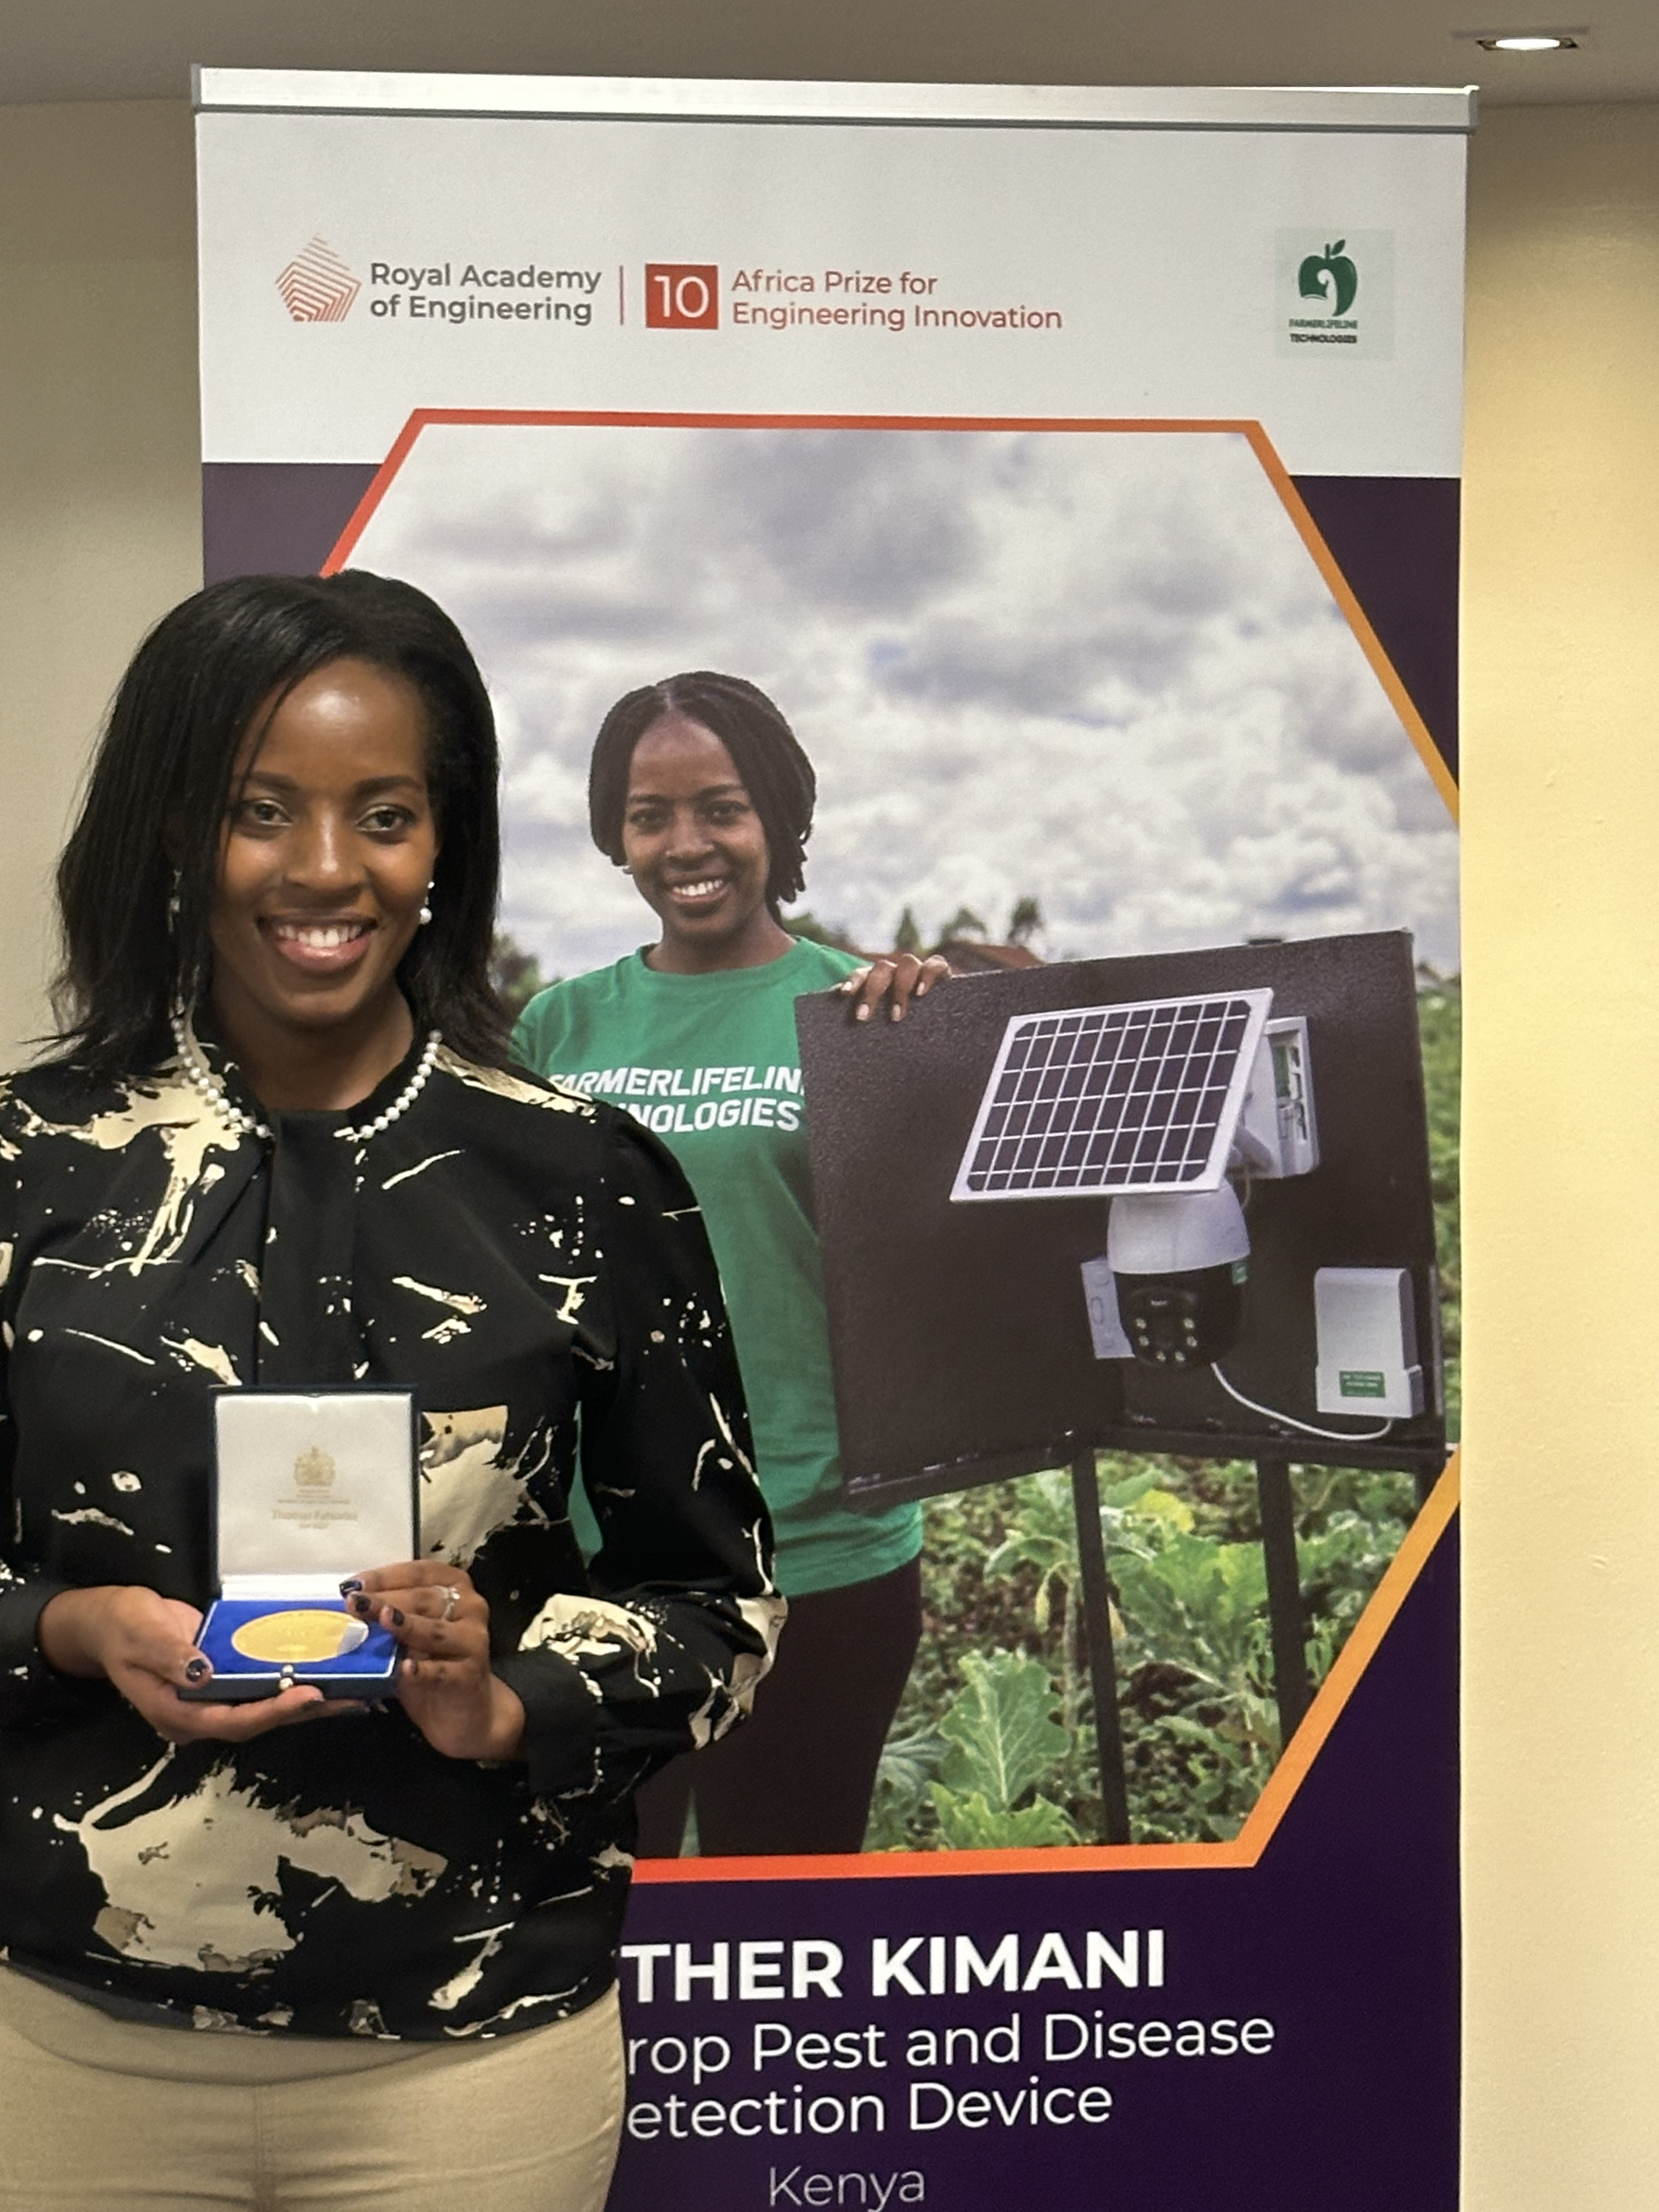 Third woman and second Kenyan wins 10th Africa Prize for Engineering Innovation